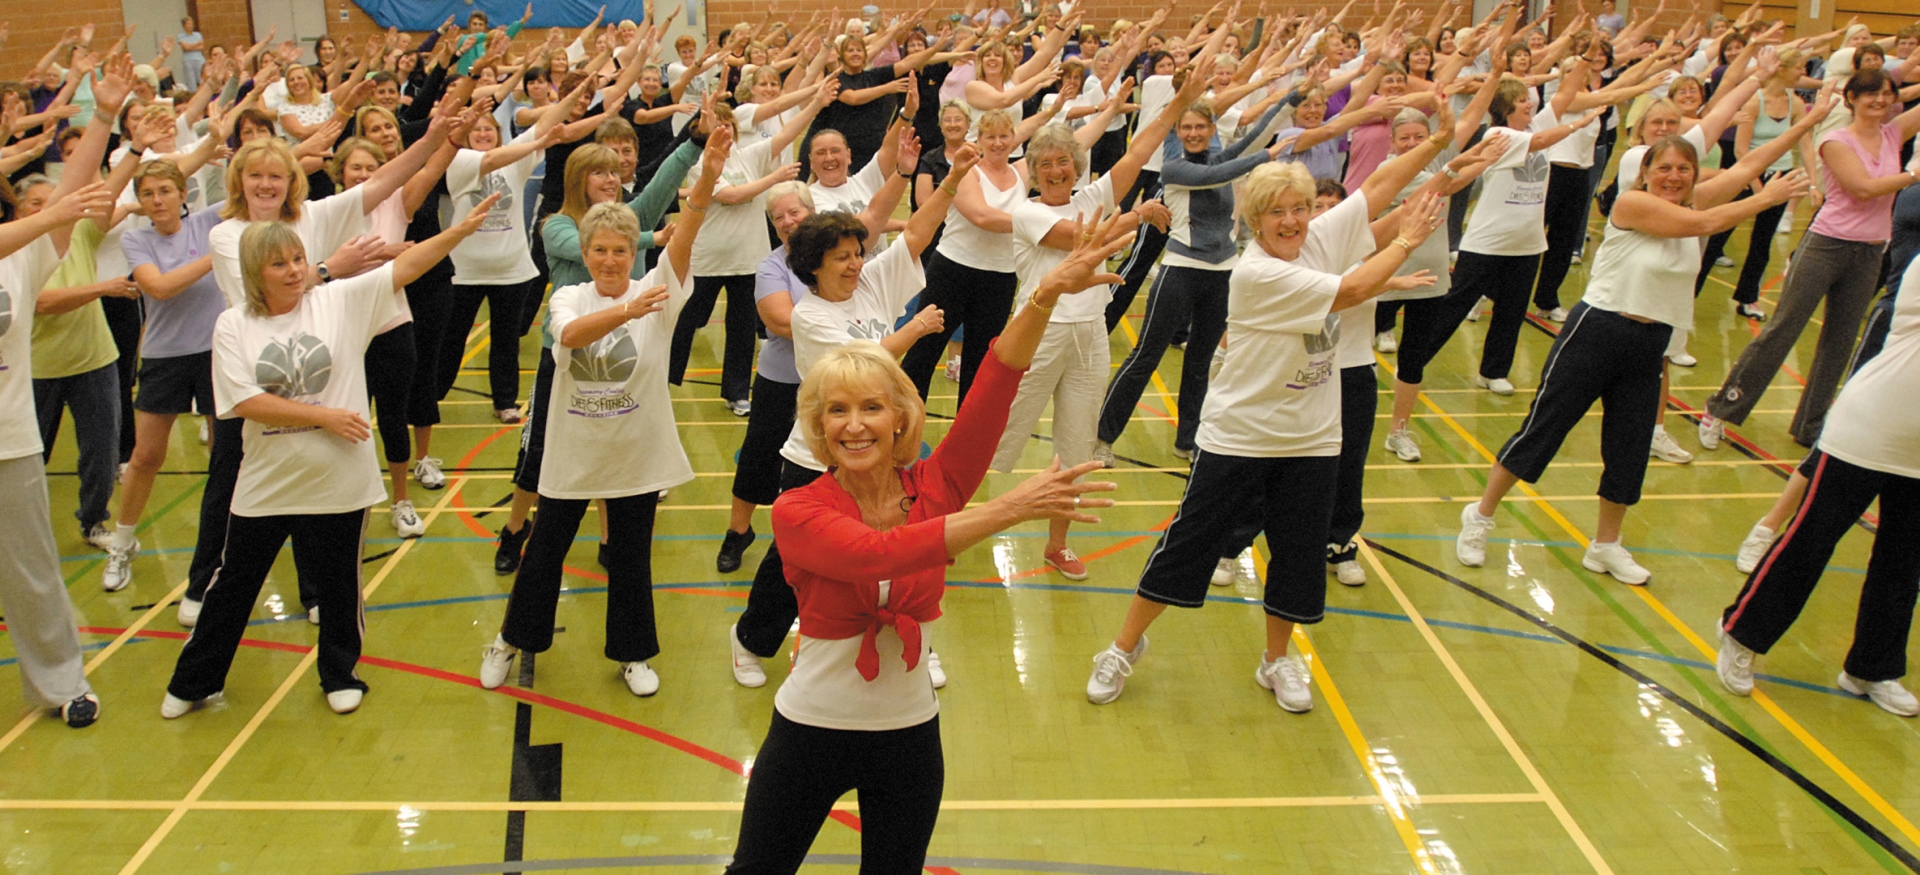 Rosemary Conley leading a giant workout at Medina Leisure Centre in 2007